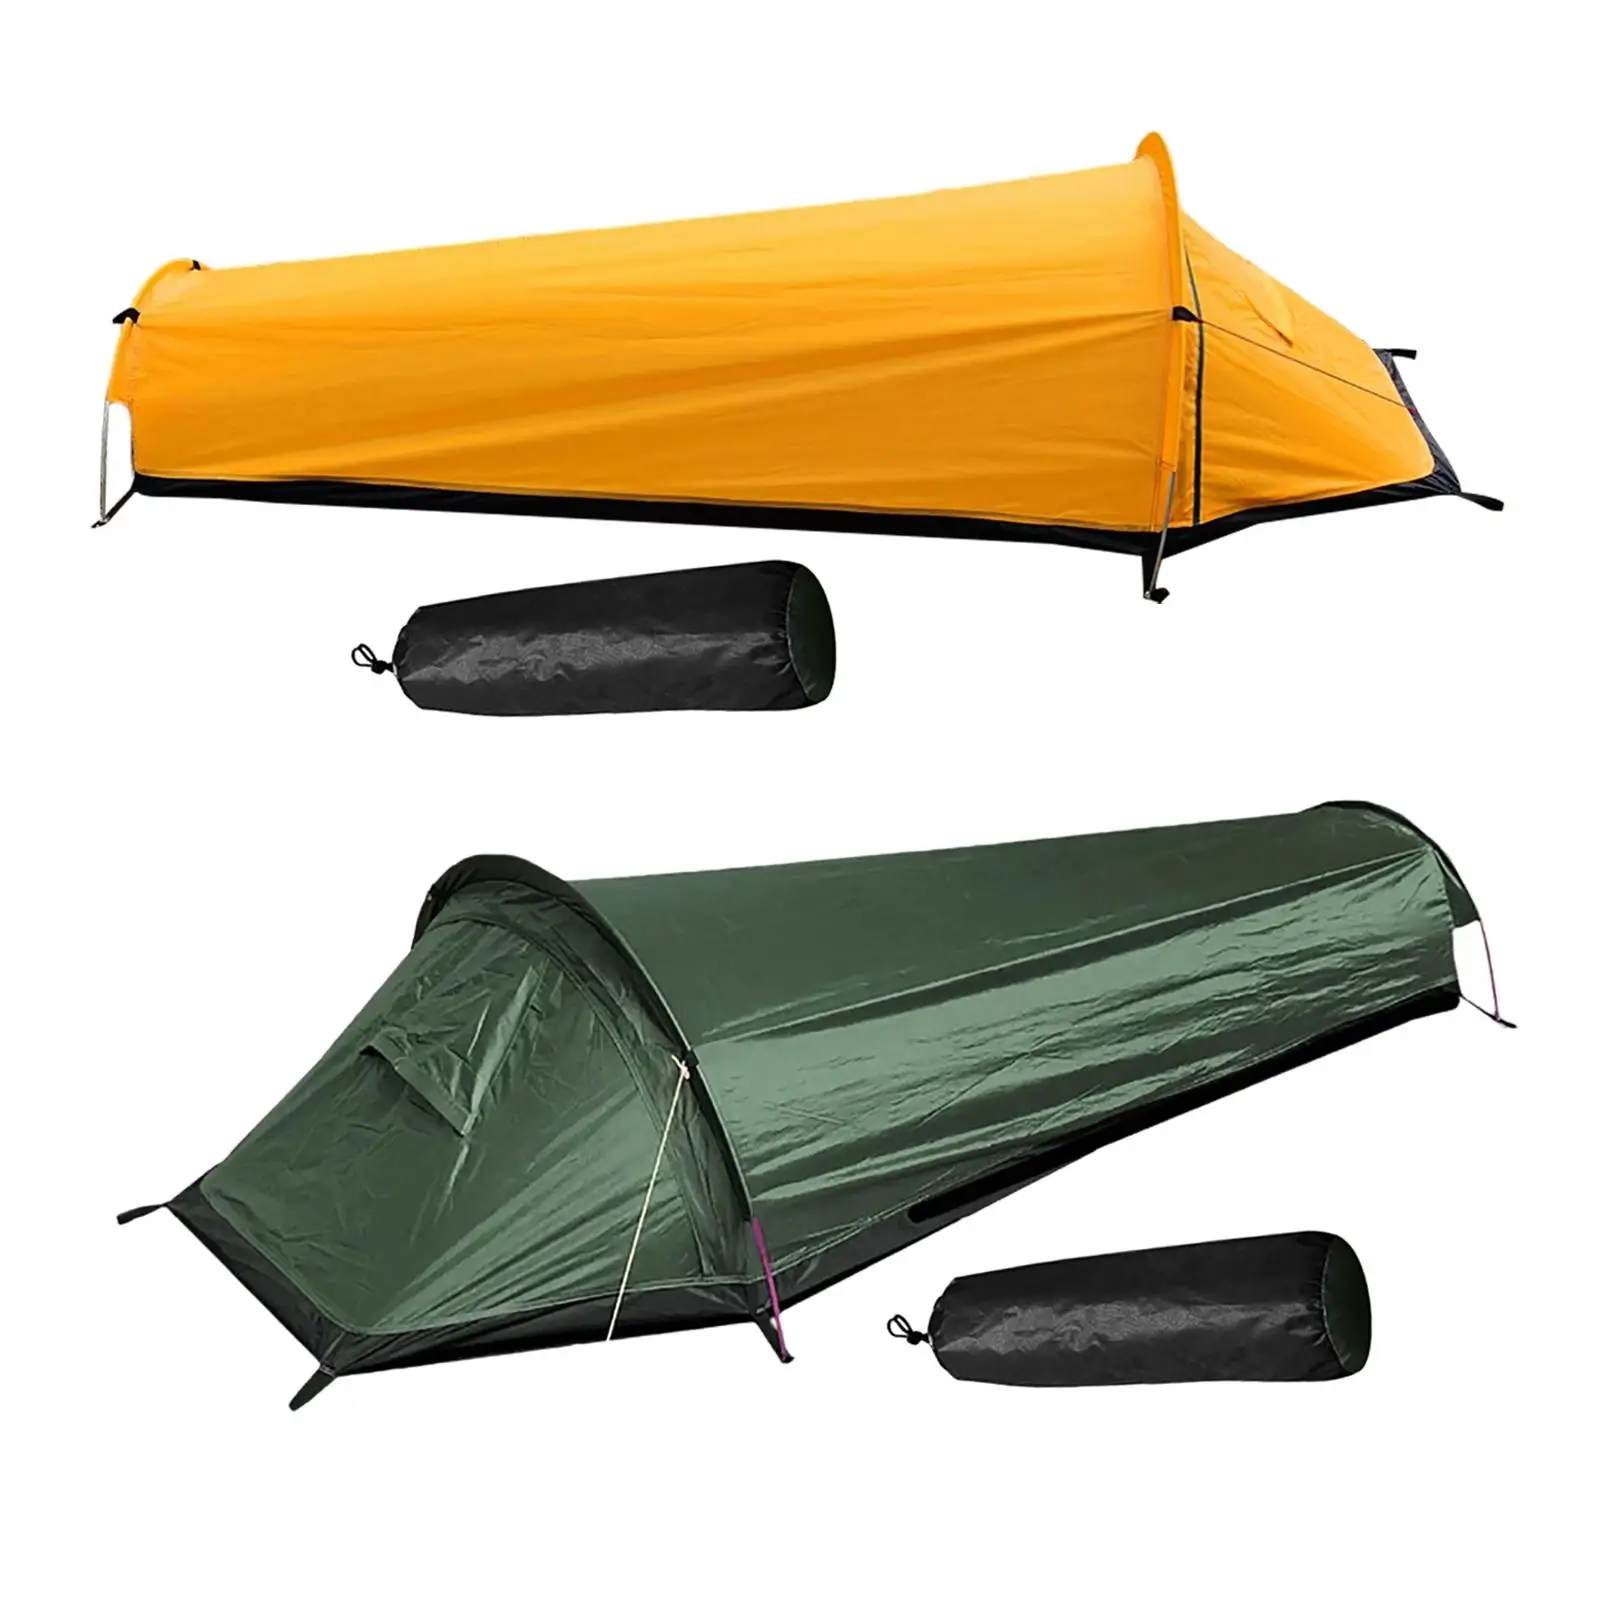 Portable Camping Tent Waterproof Sleeping Bag 1 Person Bushcraft Shelter for Fishing Festival Outdoor Activities Mountaineering